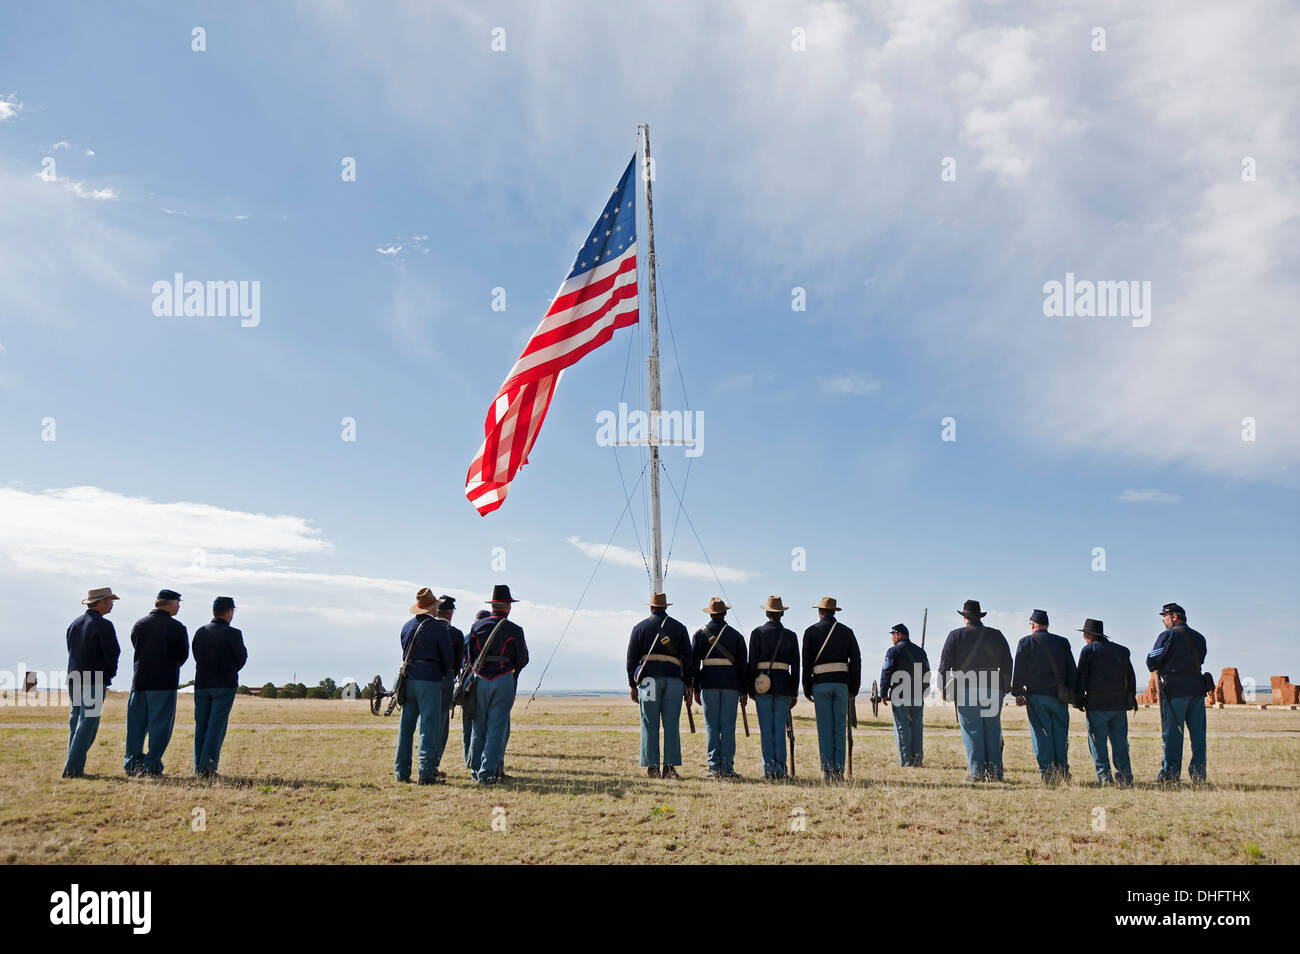 Civil War Era Union soldier reenactors at attention during flag-raising ceremony, Fort Union National Monument, New Mexico US Stock Photo